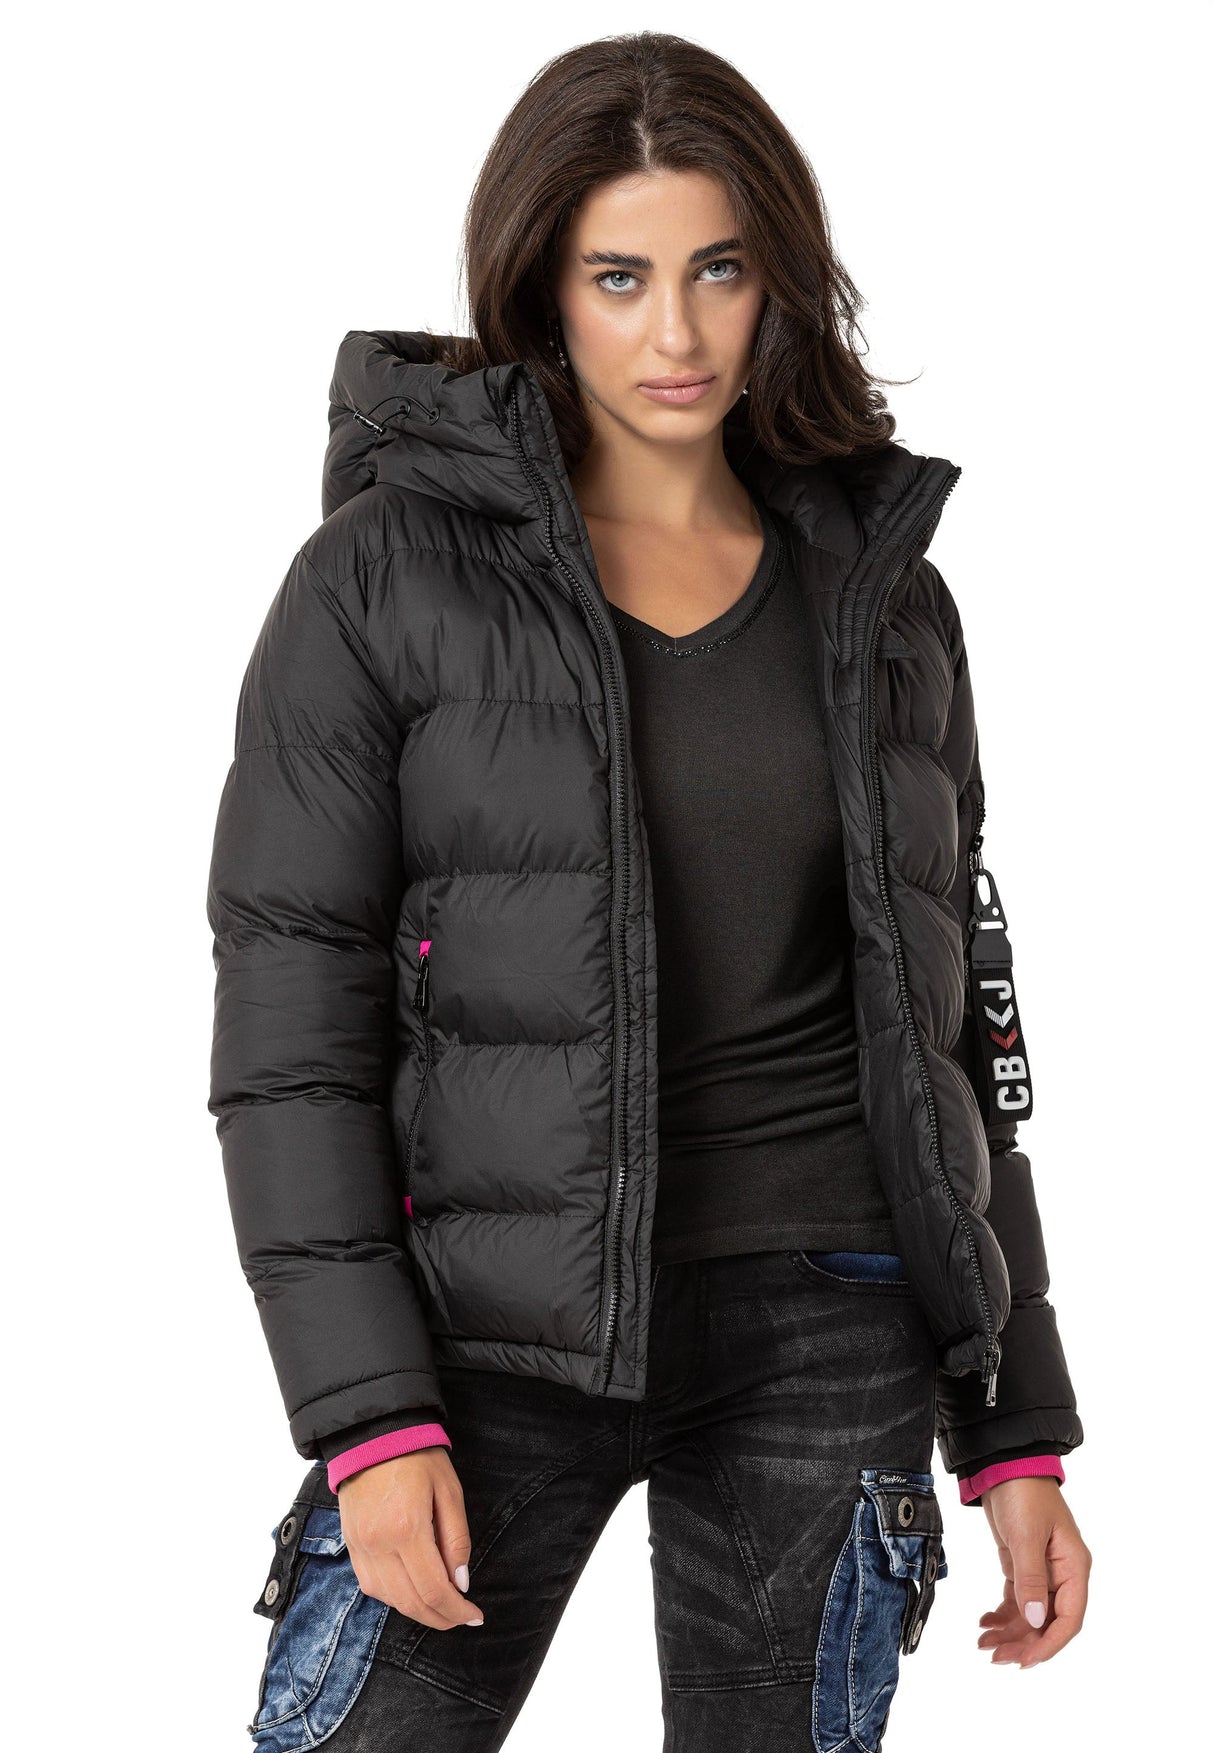 WM138 women's winter jacket with a stand -up collar